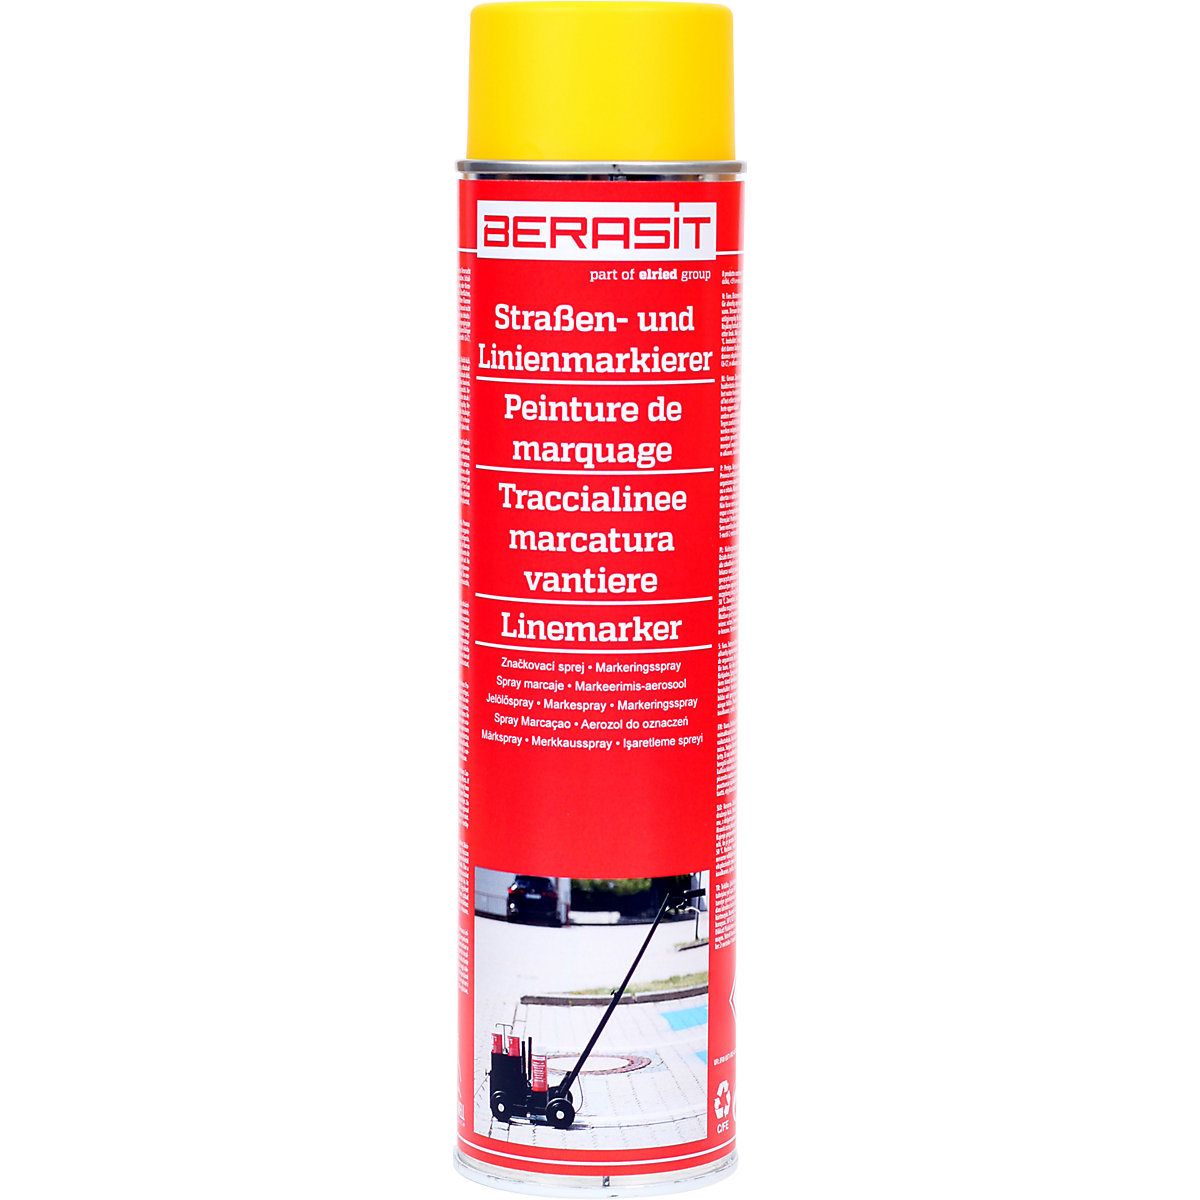 Marking paint, contents 600 ml